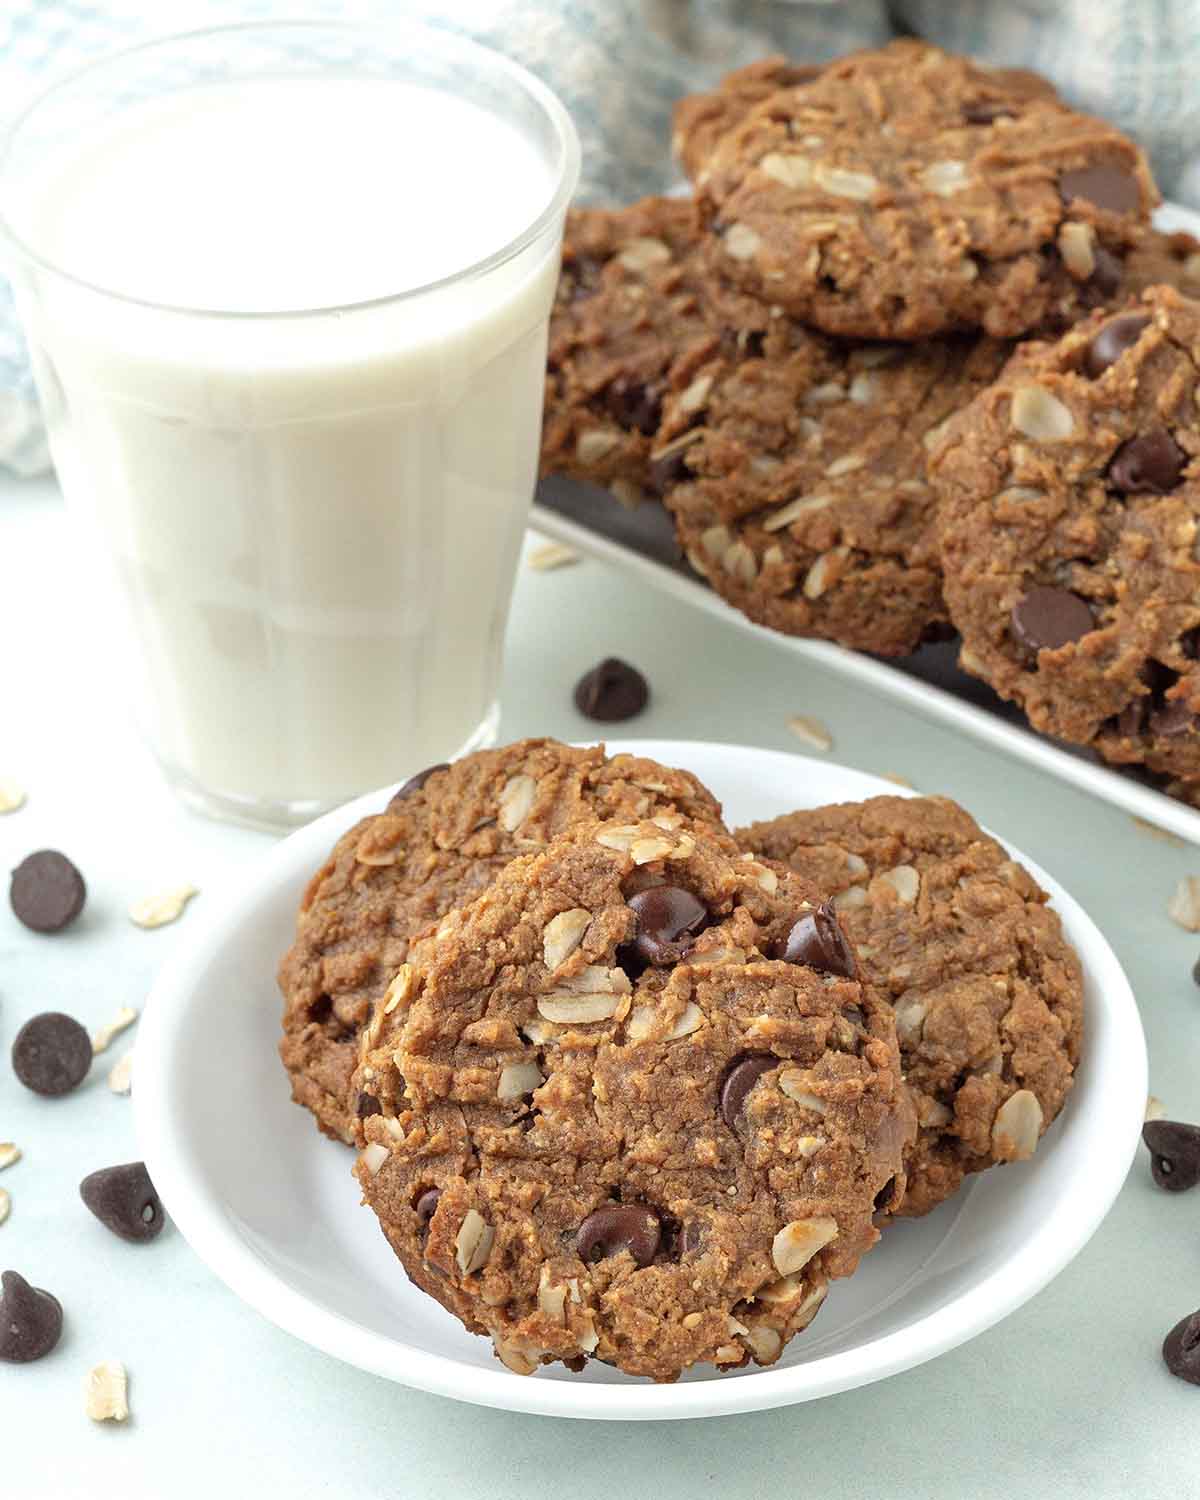 Eggless peanut butter oatmeal cookies on a plate, a glass of almond milk and more cookies sit behind the plate.